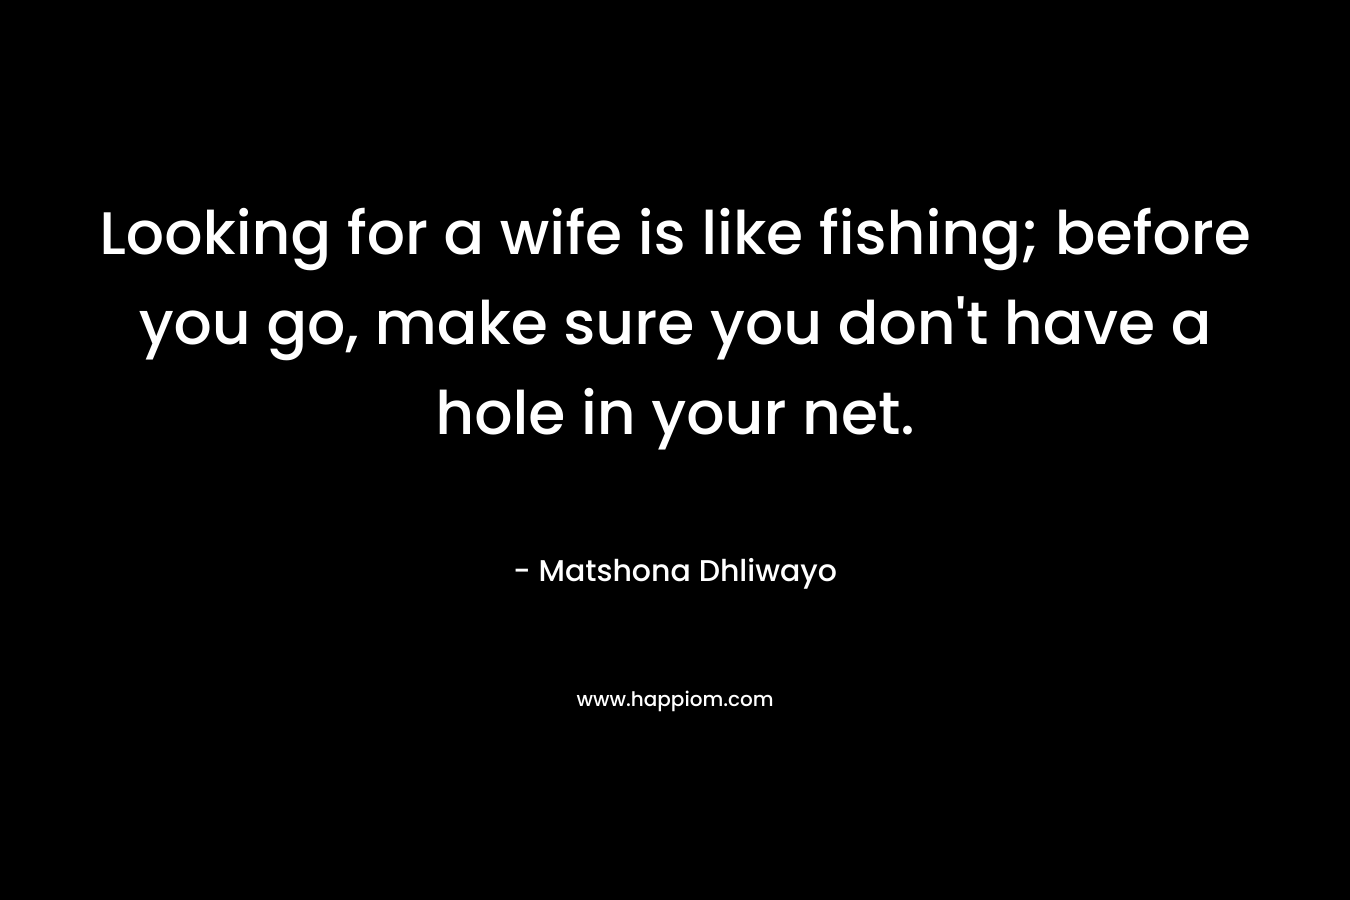 Looking for a wife is like fishing; before you go, make sure you don't have a hole in your net.